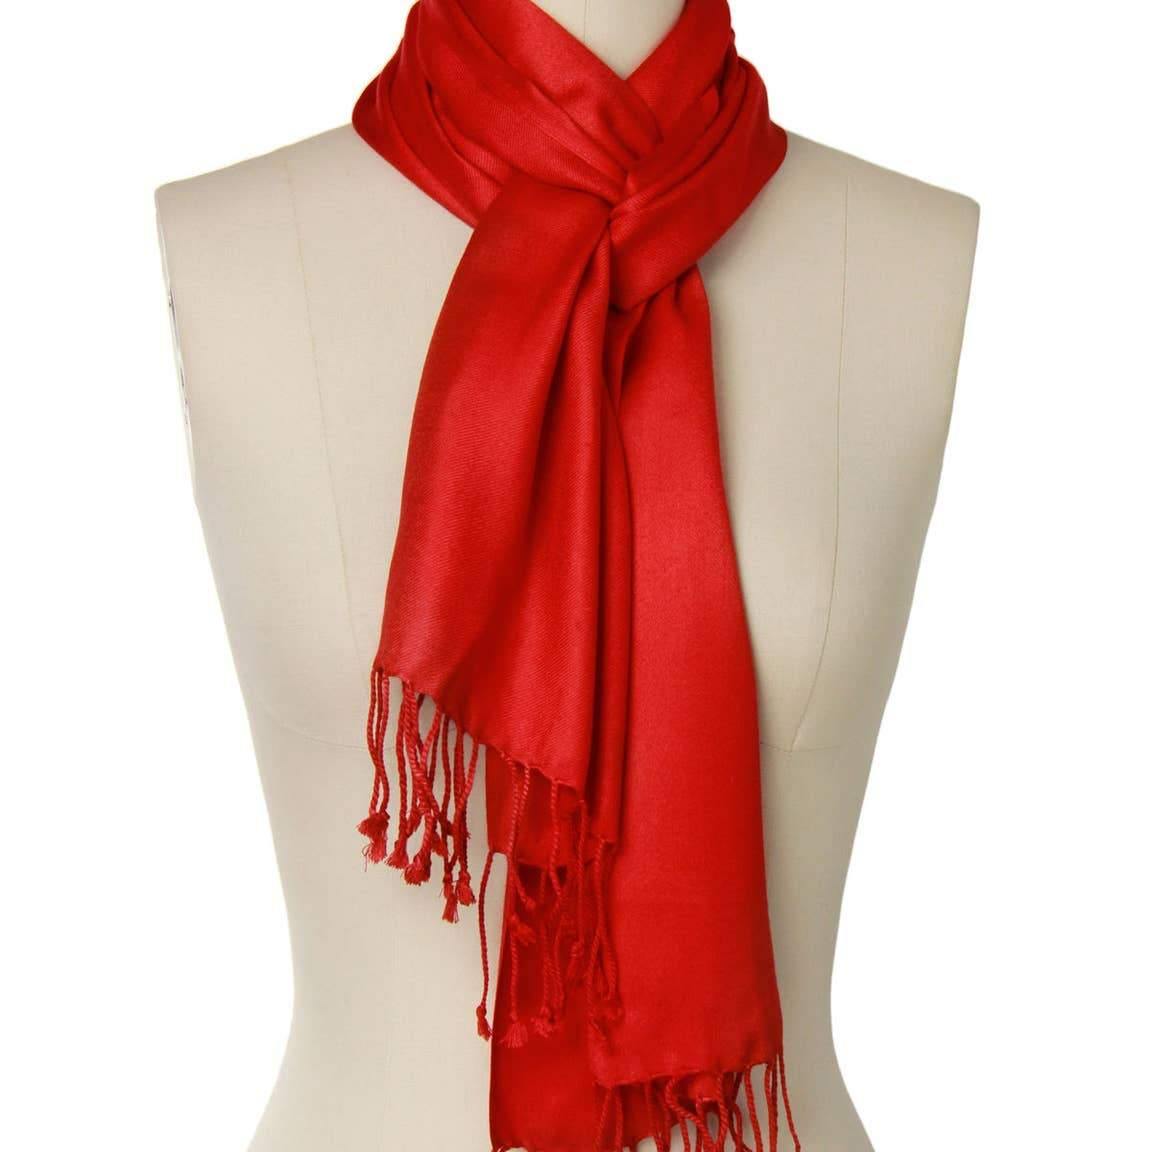 Solid Color Satin Scarf - House of Morgan Pewter